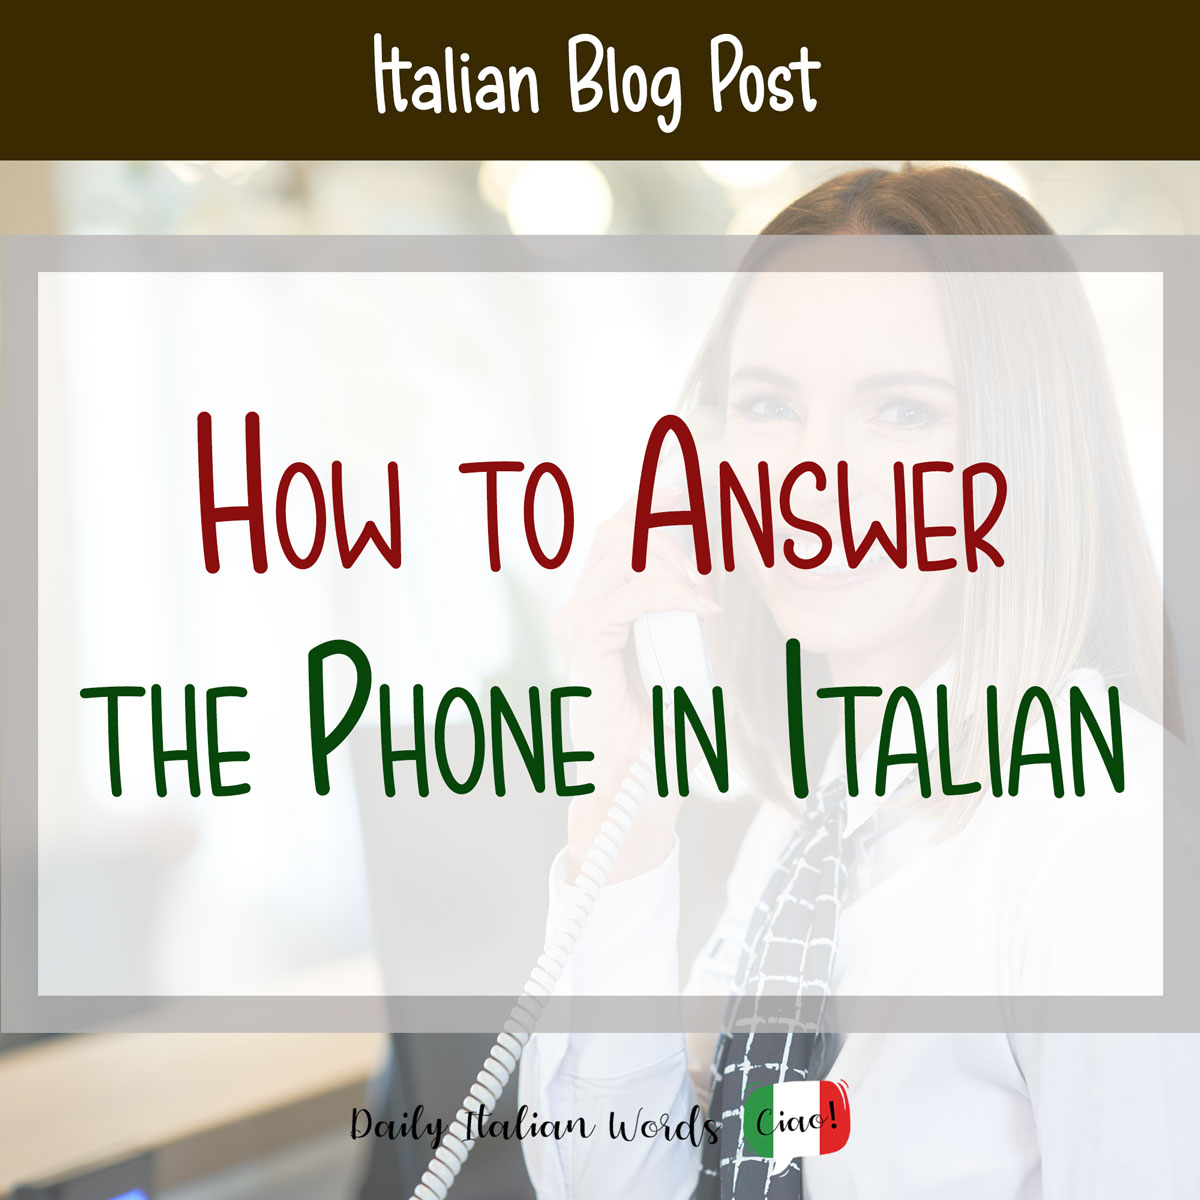 Ring, ring!How to answer the phone in Italian